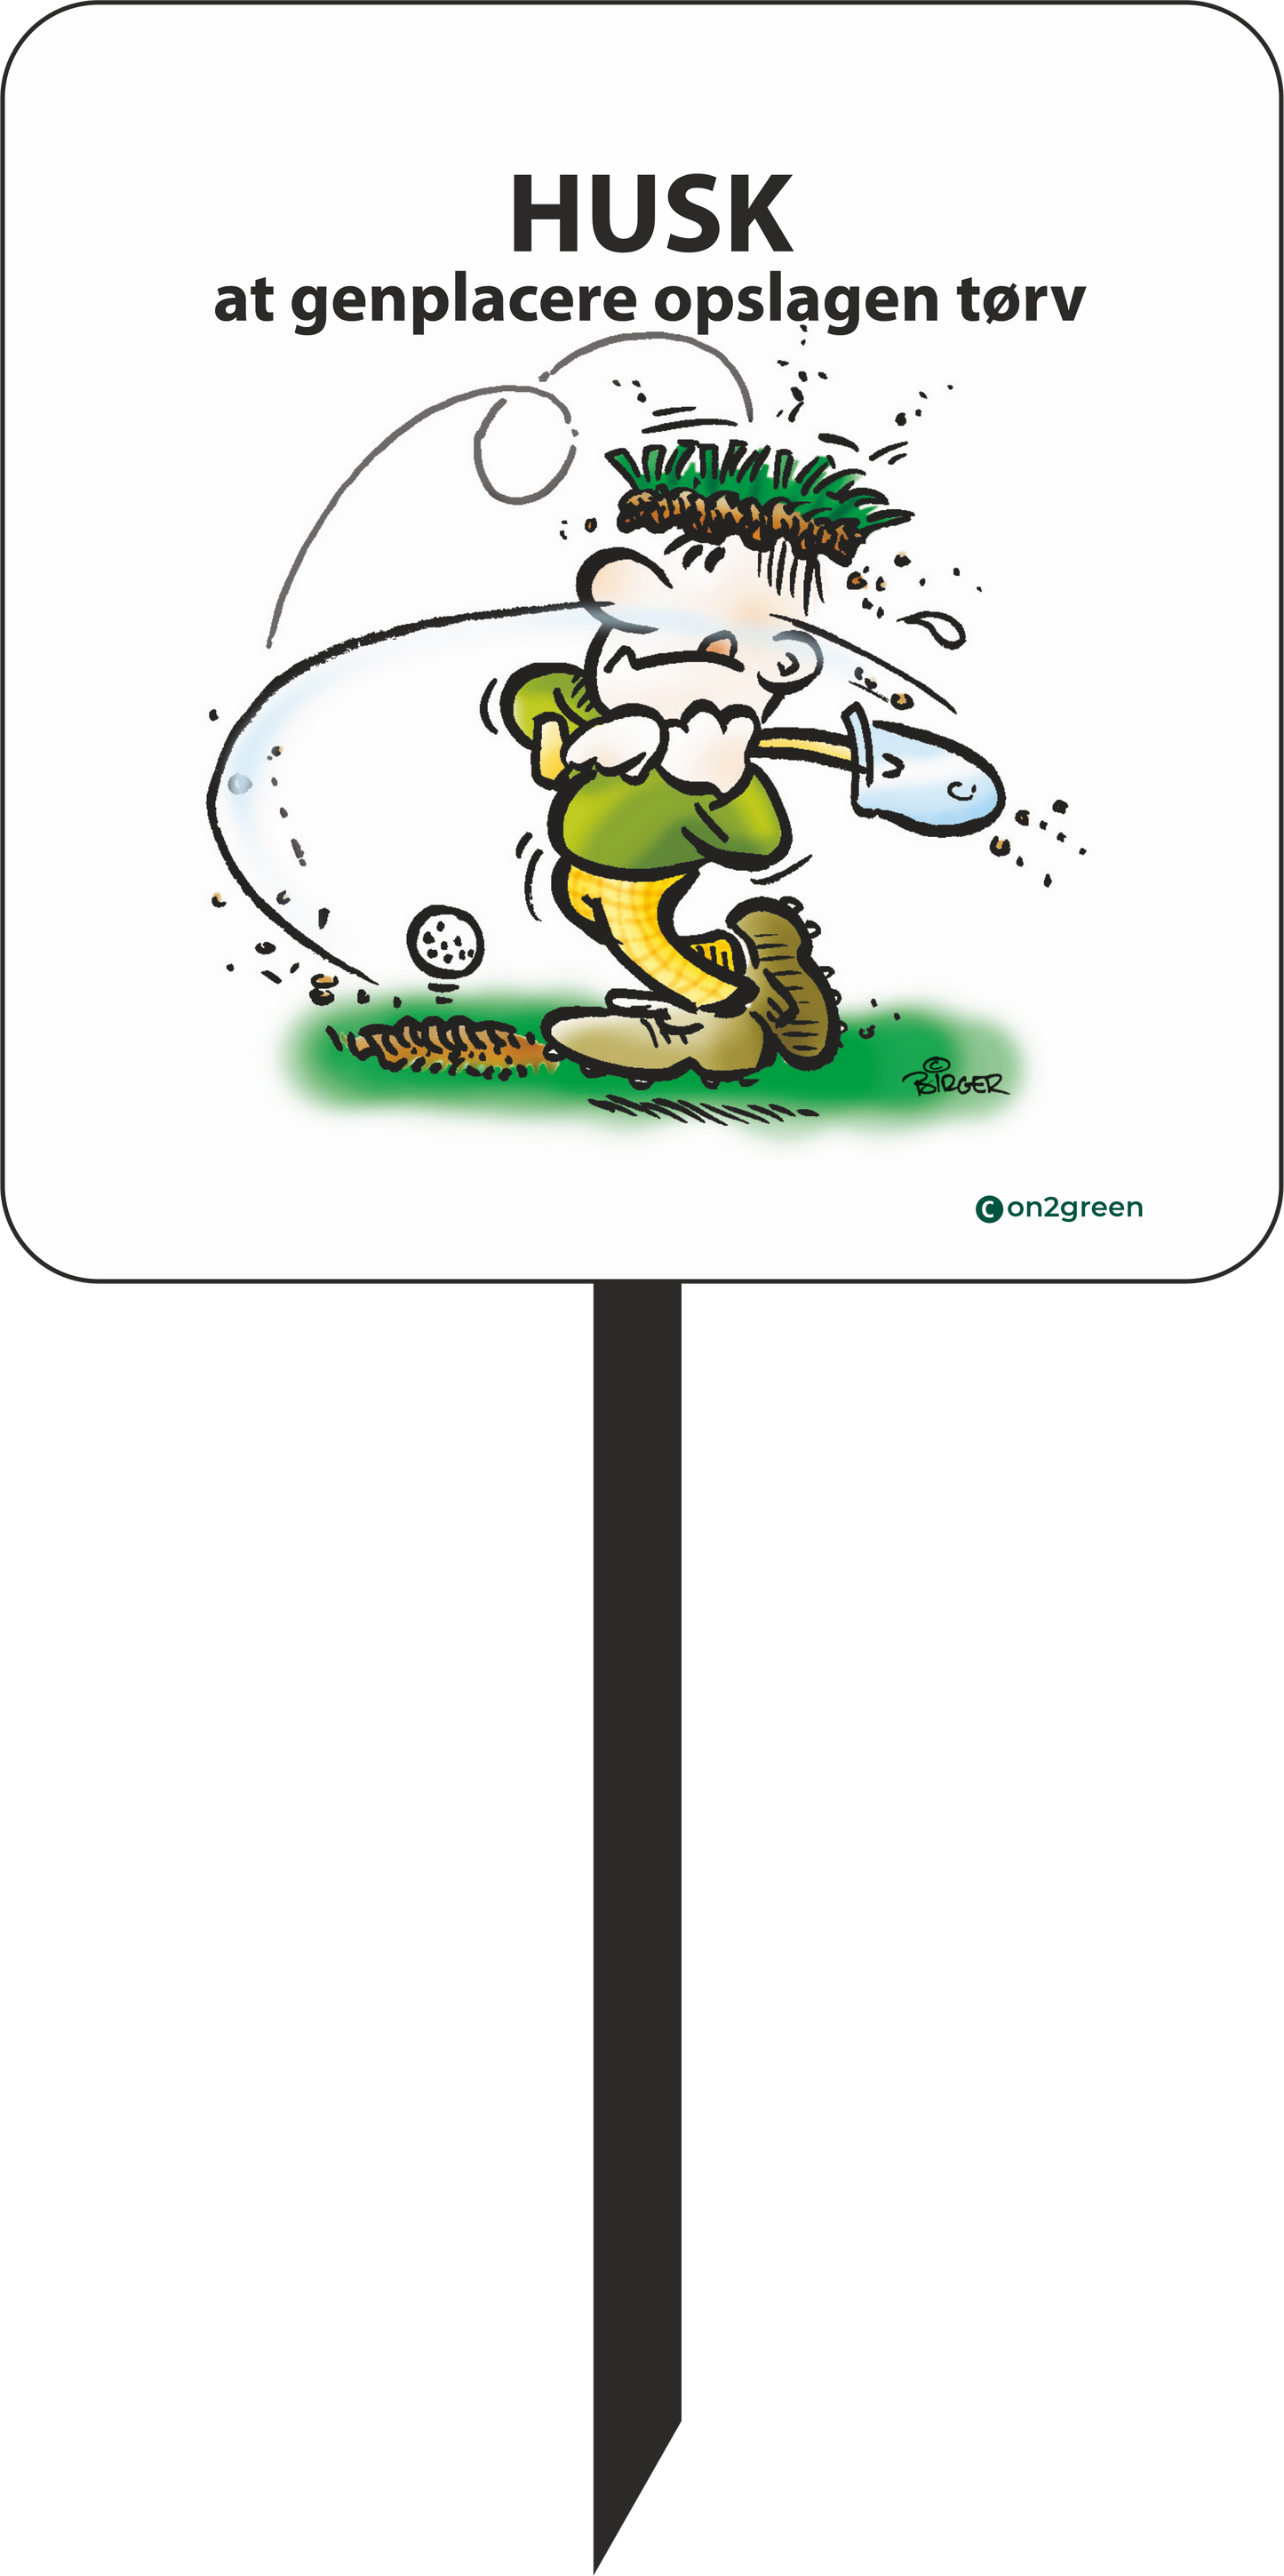 Golf sign: Do not forget to replace